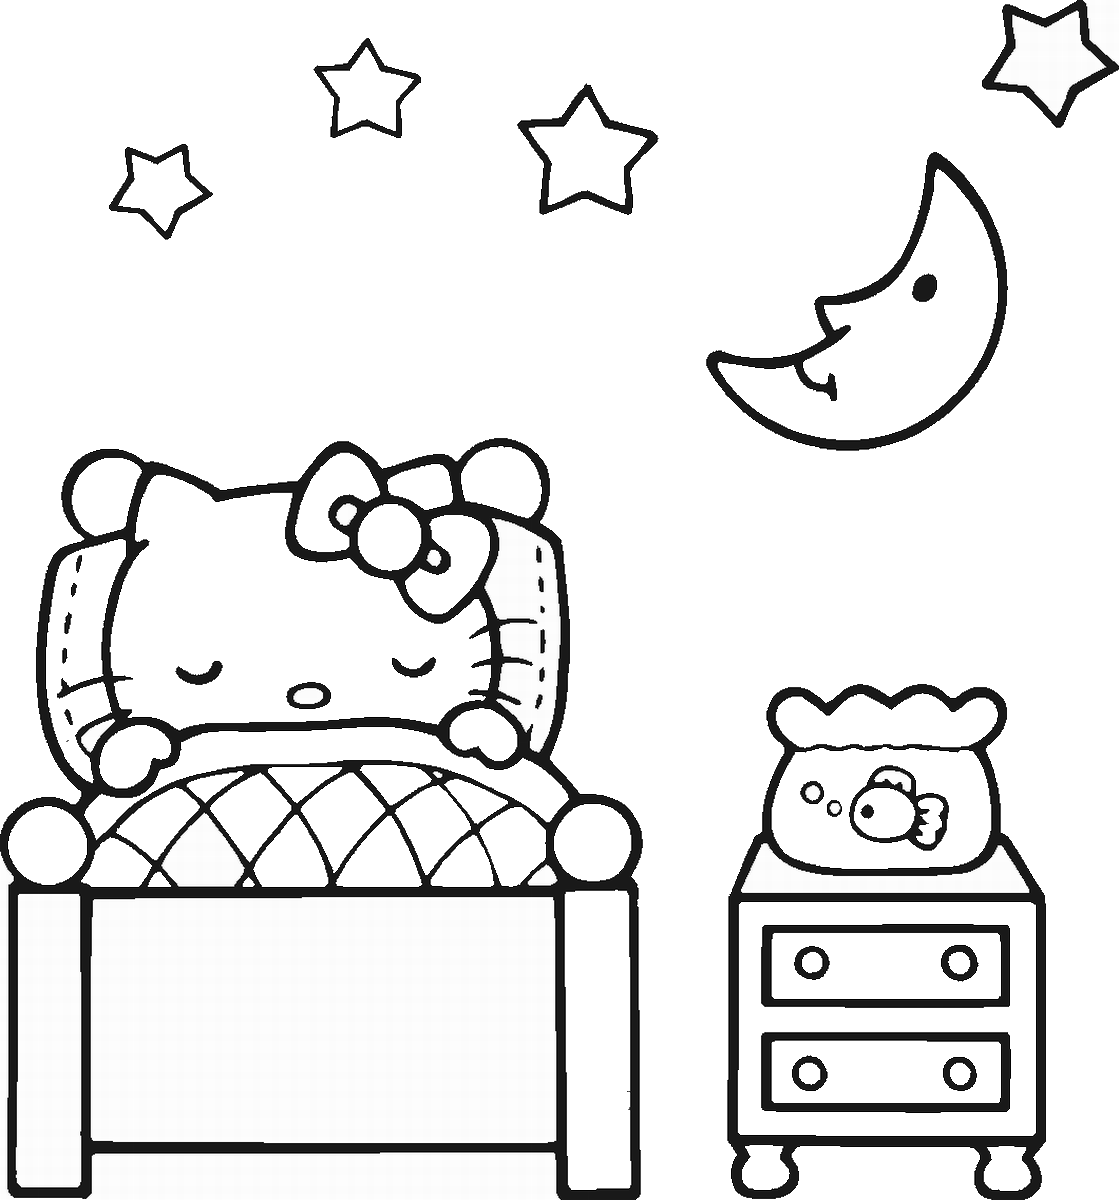 Hello Kitty Coloring Pages Cartoons hello_kitty_cl32 Printable 2020 3166 Coloring4free